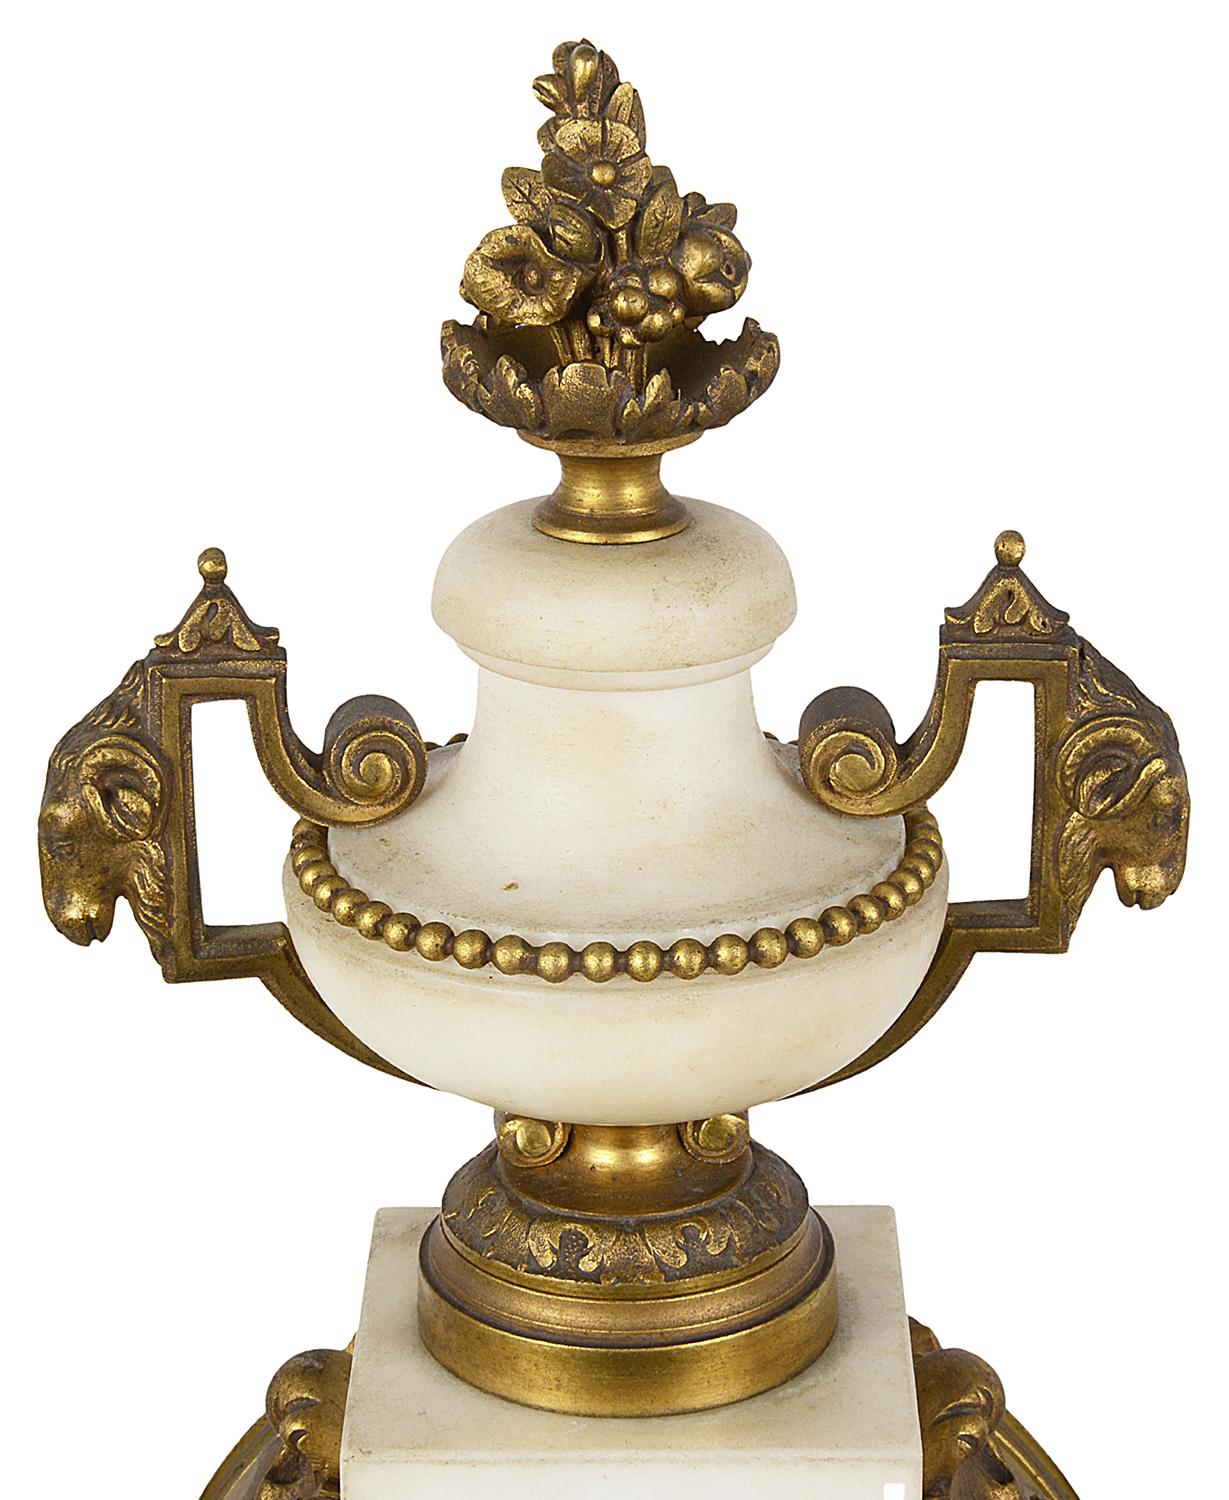 French 19th century Louis XVI style white marble and gilded ormolu clock garniture, having a two handled urn finial above a white enamel clock face, an eight day duration clock that strikes on the hour and half hour. Flanked by a matching pair of